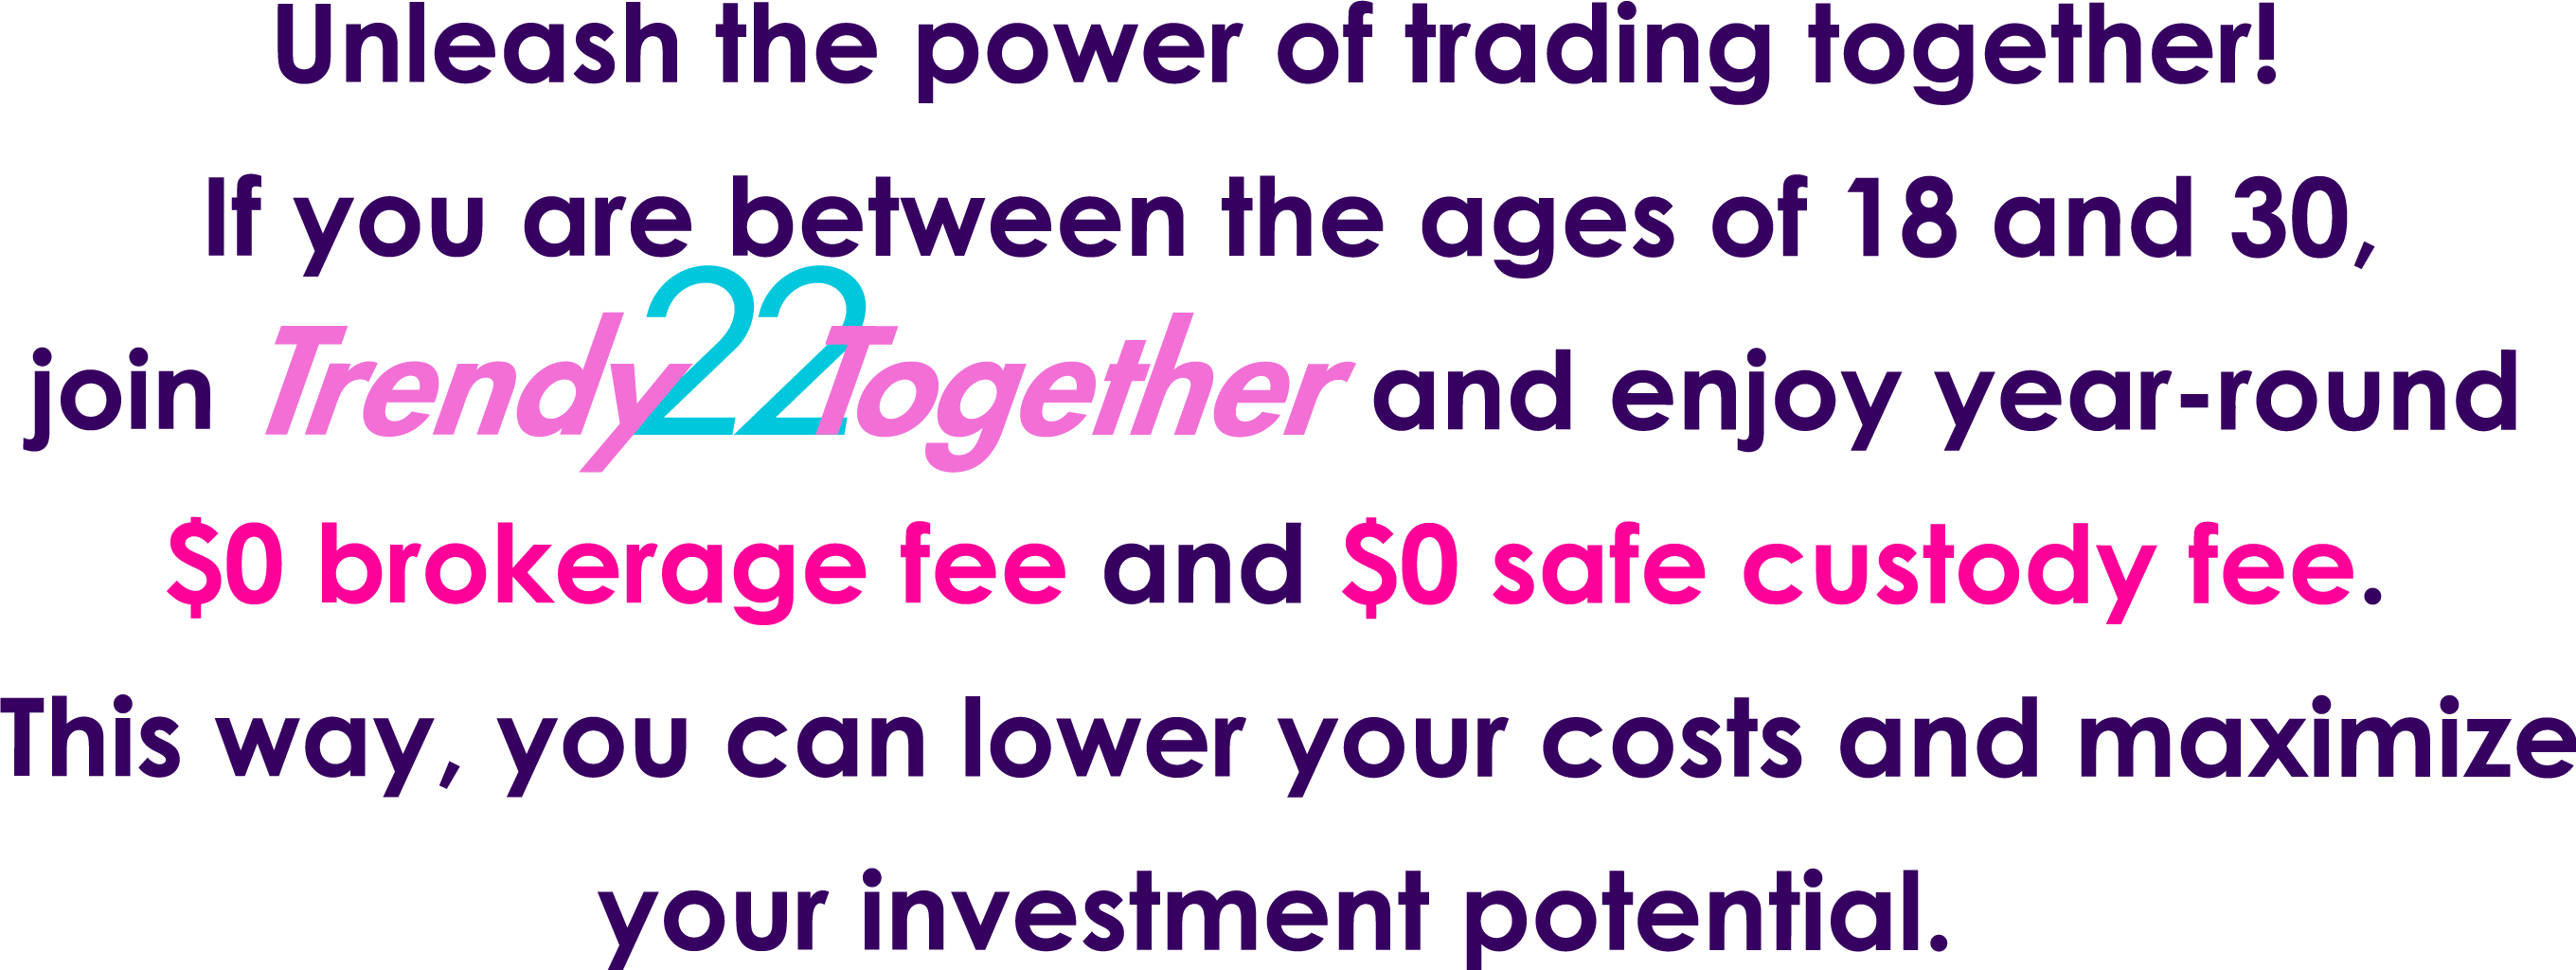 Unleash the power of trading together! If you are between the ages of 18 and 30, join TrendyTogether and enjoy year-round HK$0 brokerage fee and HK$0 safe custody fee. This way, you can lower your costs and maximize your investment potential.